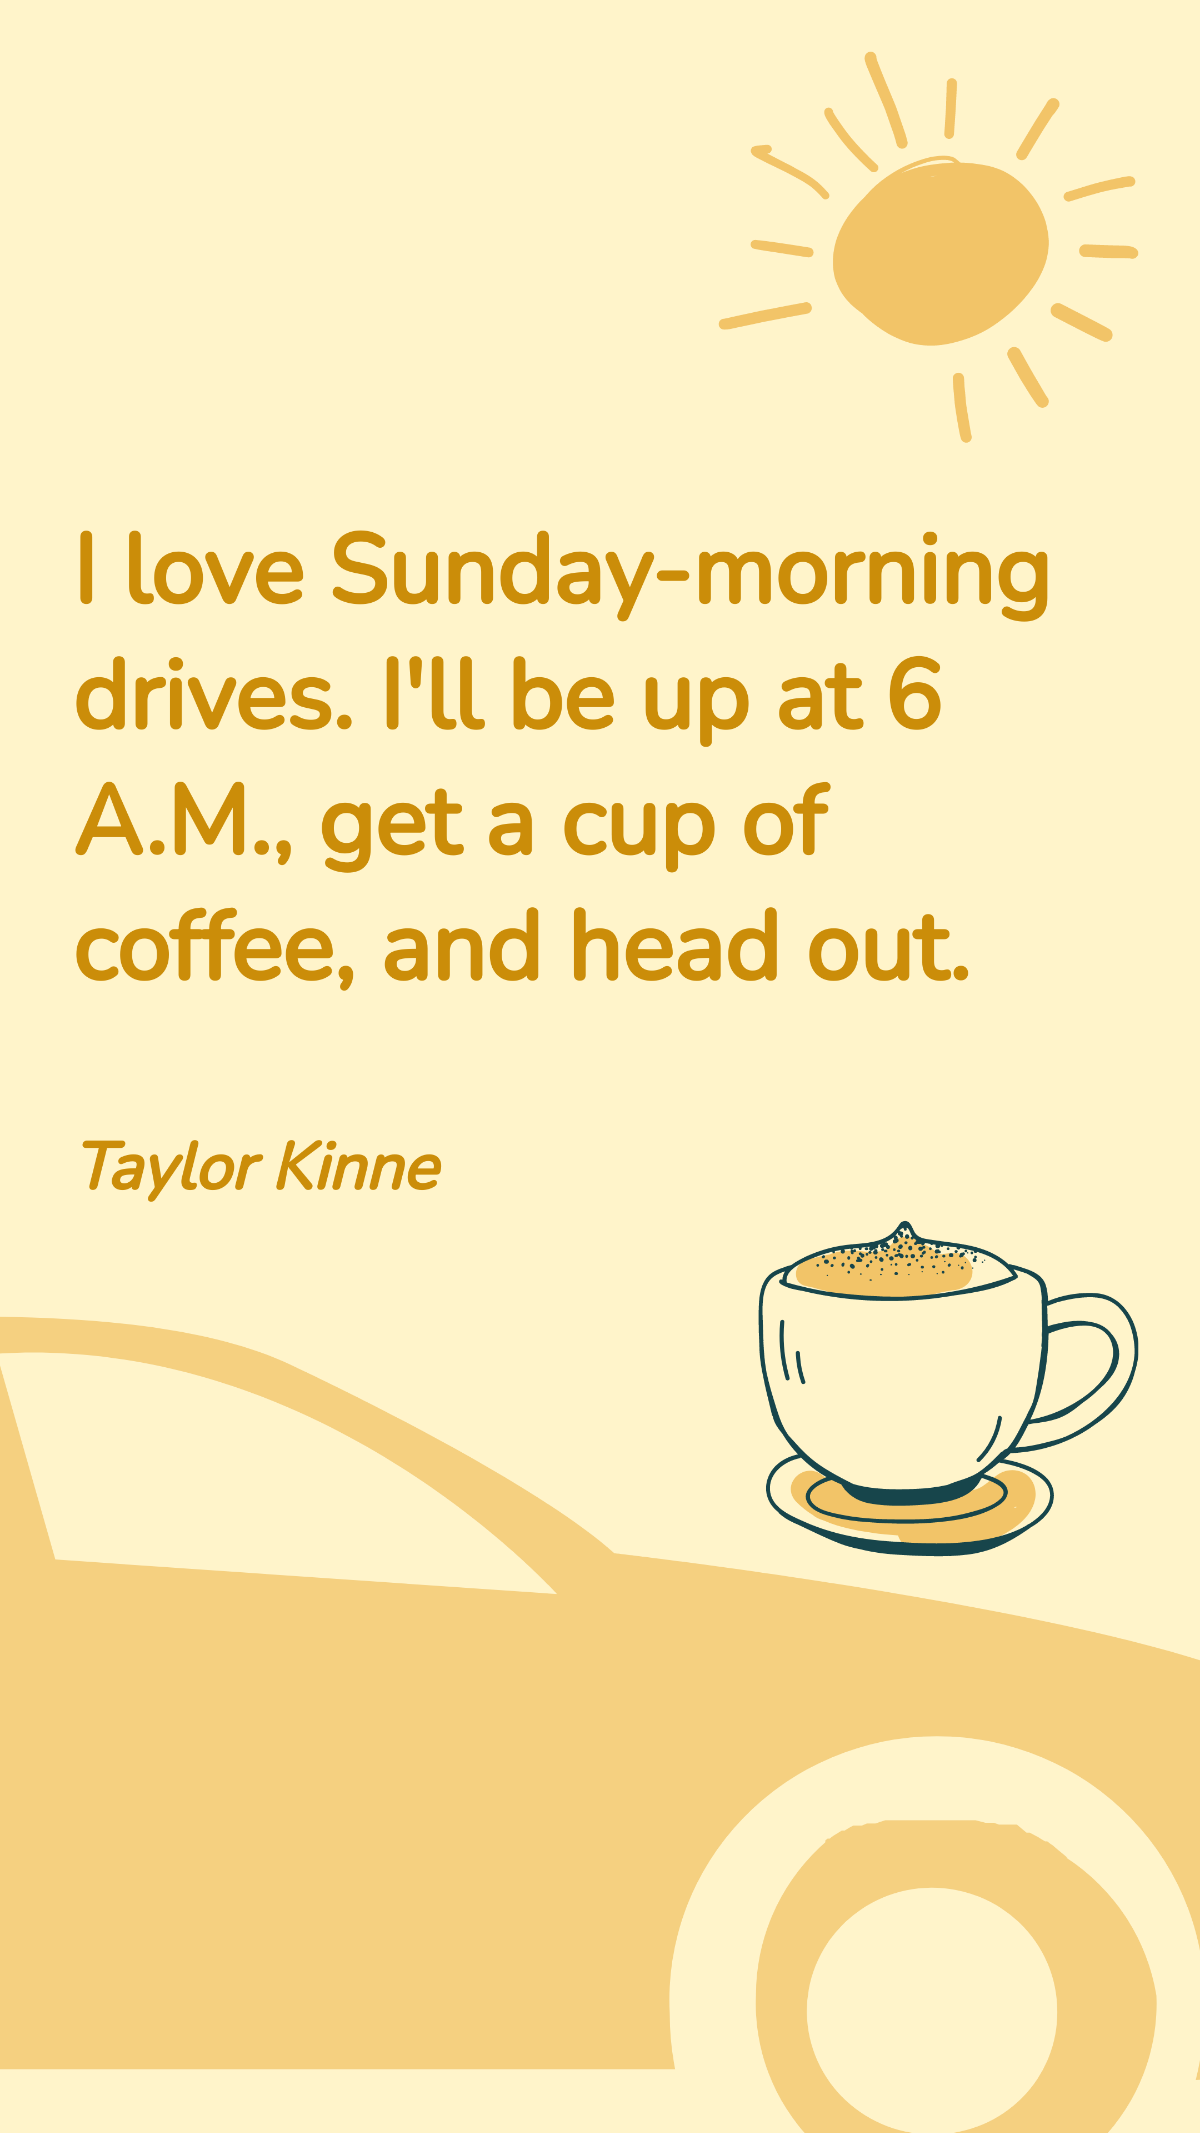 Taylor Kinne - I love Sunday-morning drives. I'll be up at 6 A.M., get a cup of coffee, and head out. Template